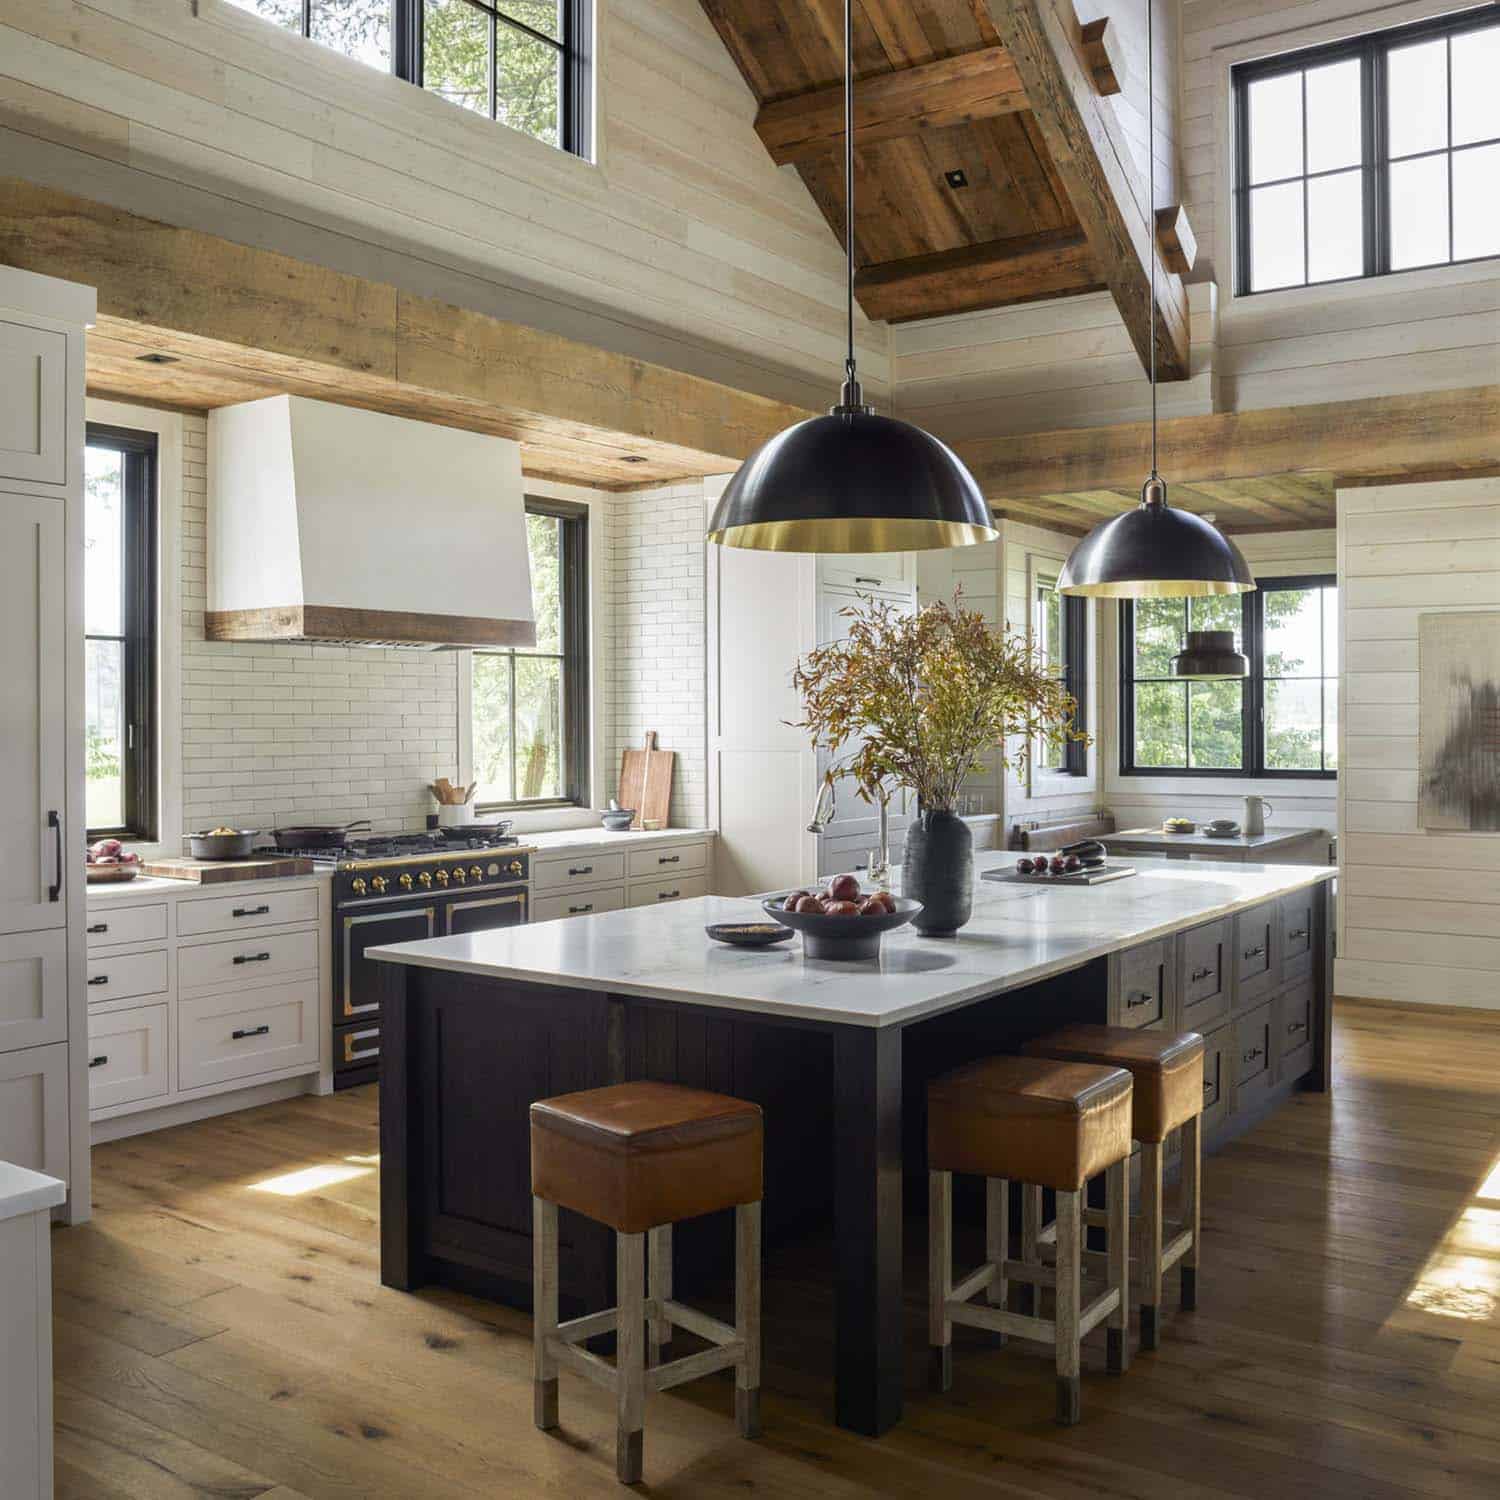 modern rustic kitchen with a large island and tall ceilings